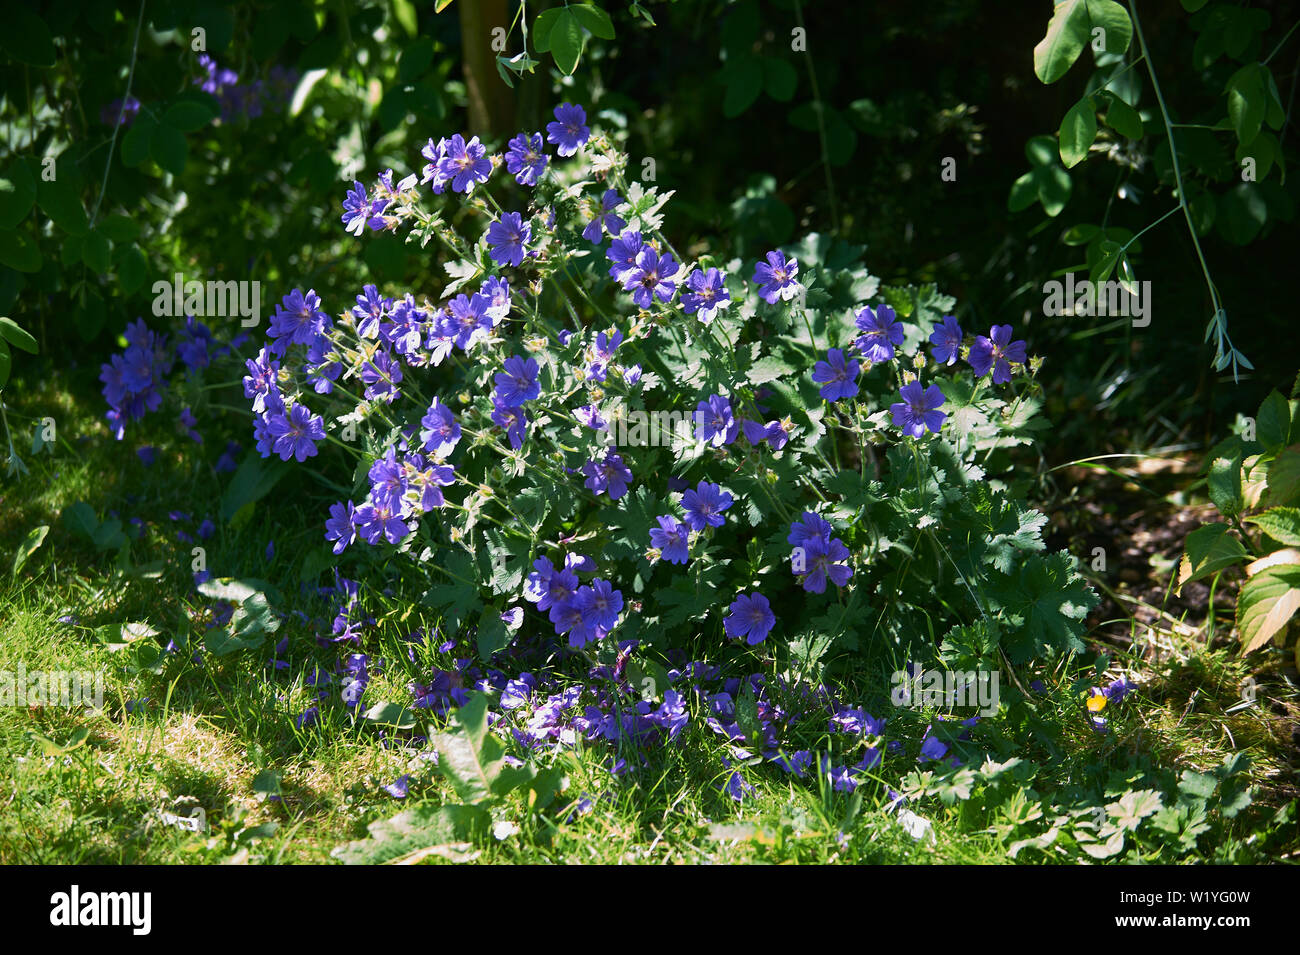 Geranium sanguineum, common names bloody crane's-bill or bloody geranium, is a species of hardy flowering herbaceous perennial plant in the cranesbill Stock Photo